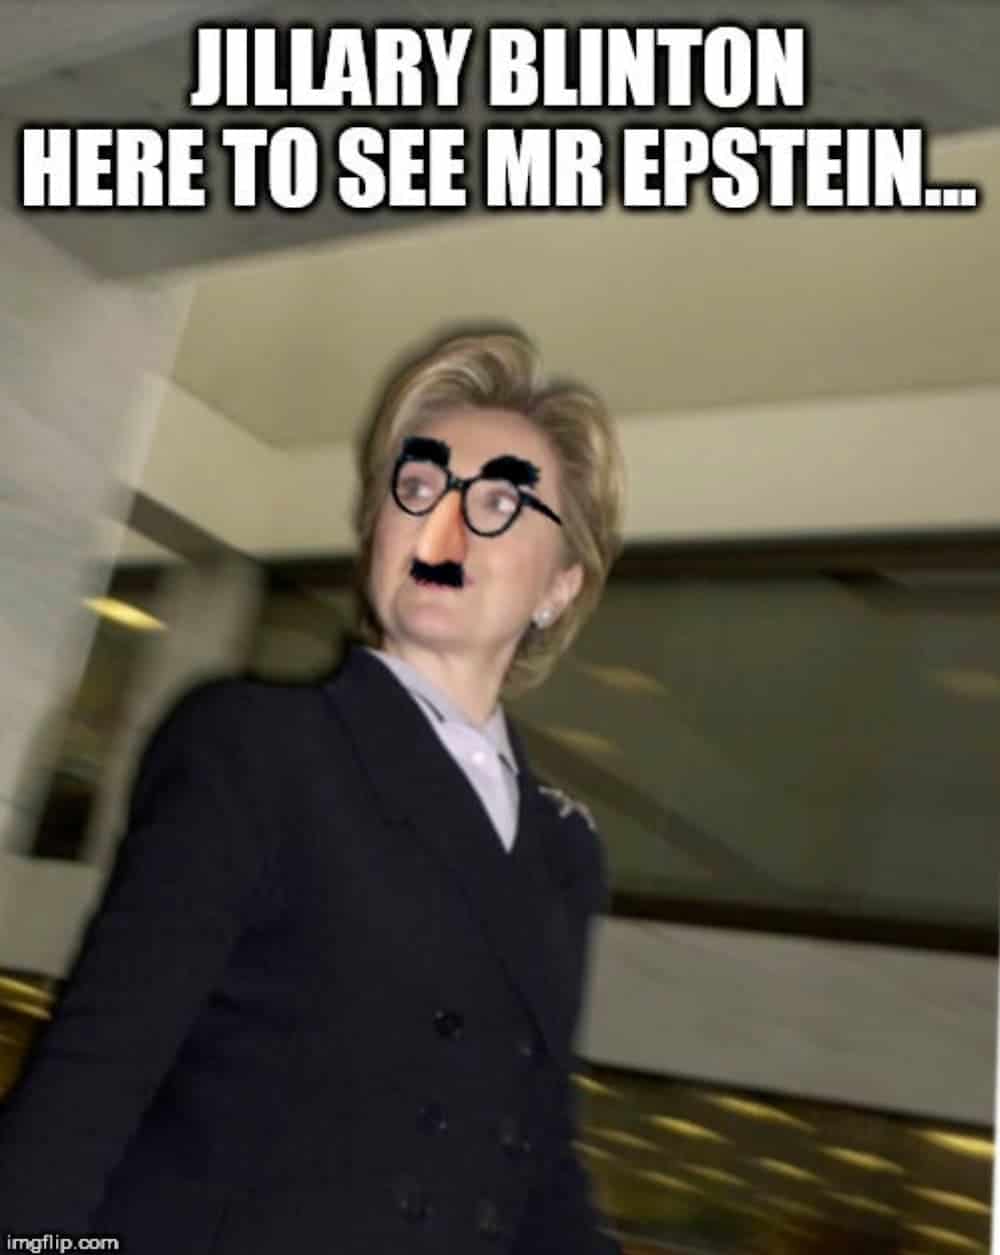 A meme of Hillary Clinton in disguise is shown.